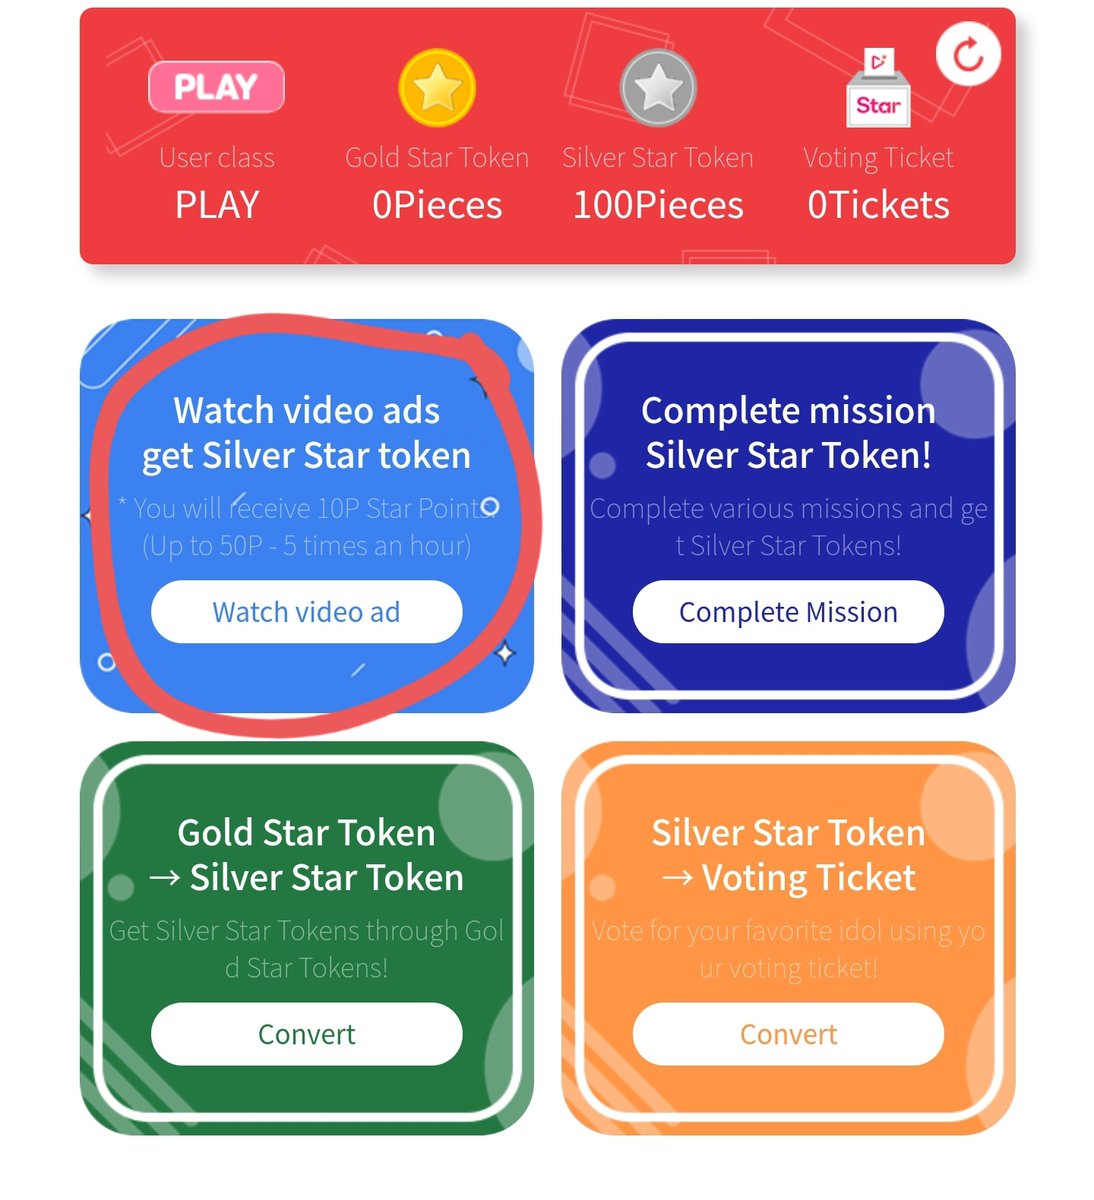 For free silver star tokens, you can watch up to 5 ads per hour. One add equals 10 star tokens, which equals about 1 ticket. You will also be automatically given 100 tokens when you first sign up. After watching 5 ads and getting all the tokens, you can move on to the next step.